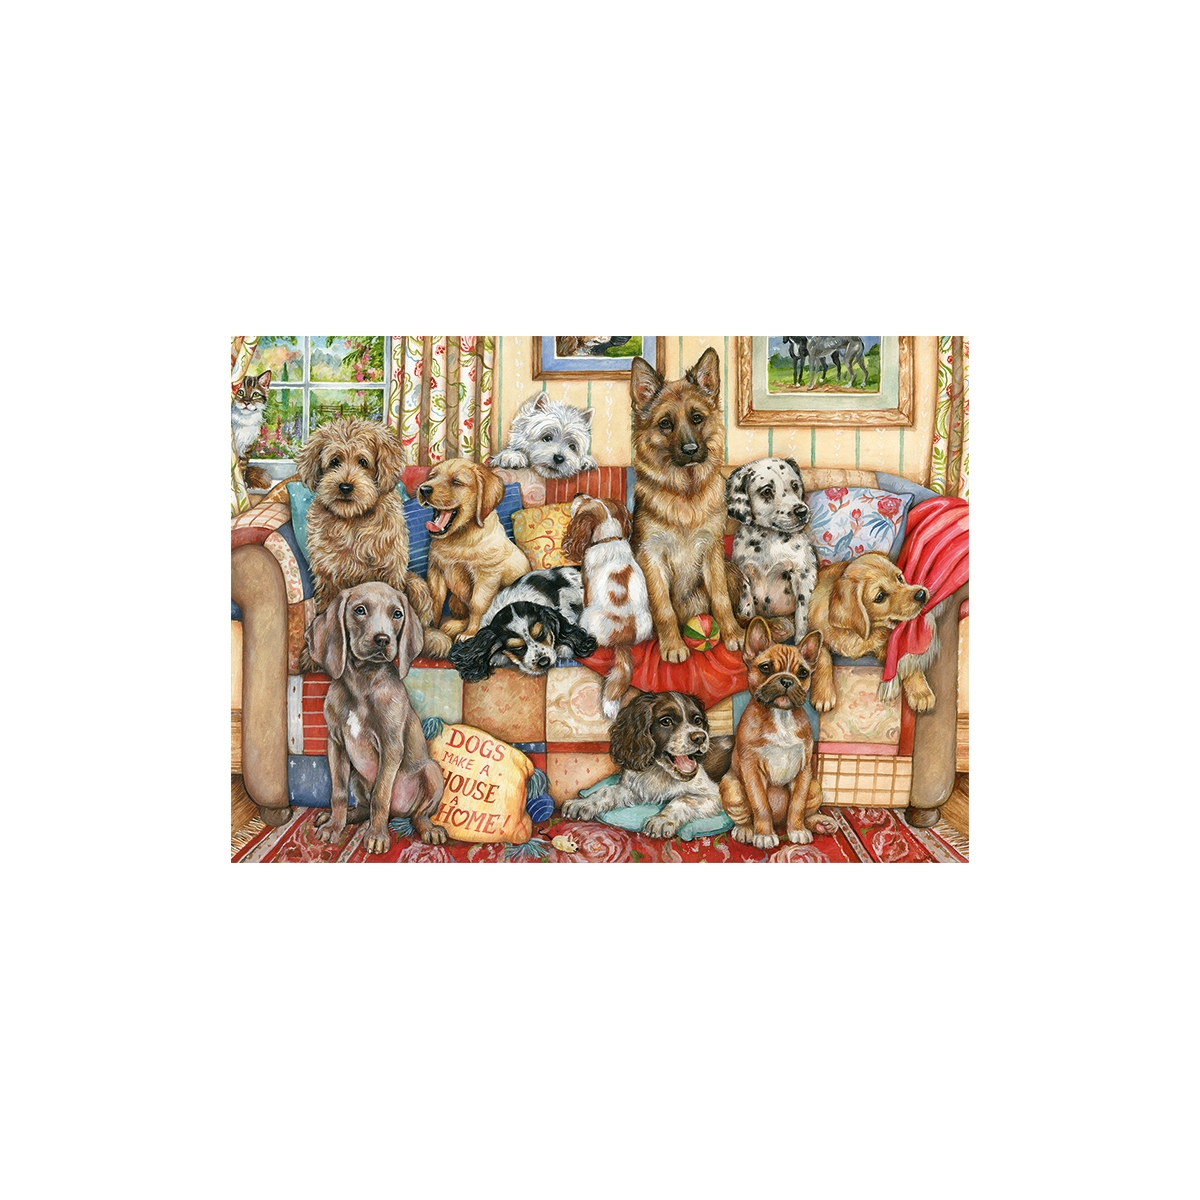 FALCON Jumbo 11293 Gathering on The Couch-1000 Teile Zubehör, Dog Mehrfarben Puzzle